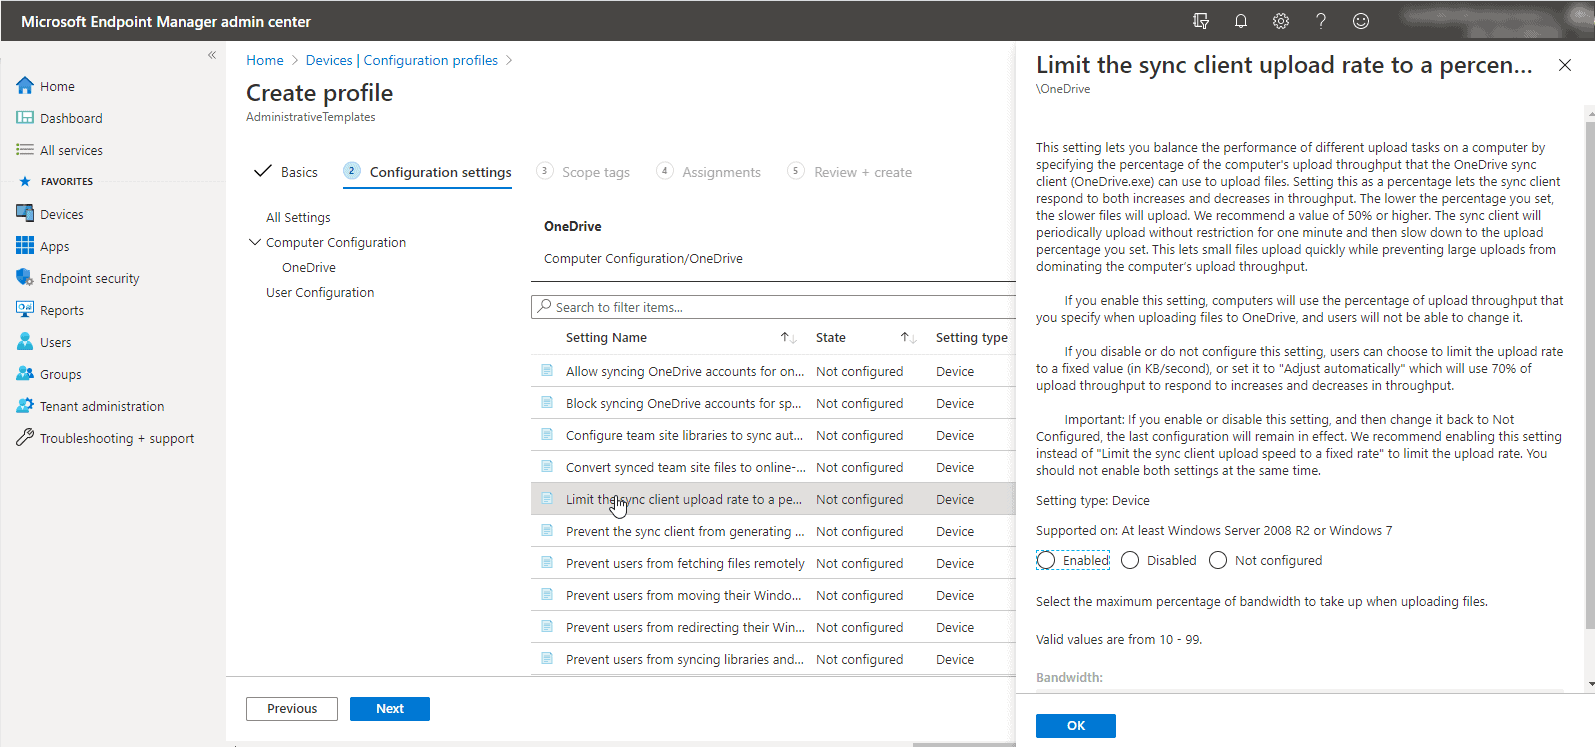 OneDrive policies in Microsoft Endpoint Manager